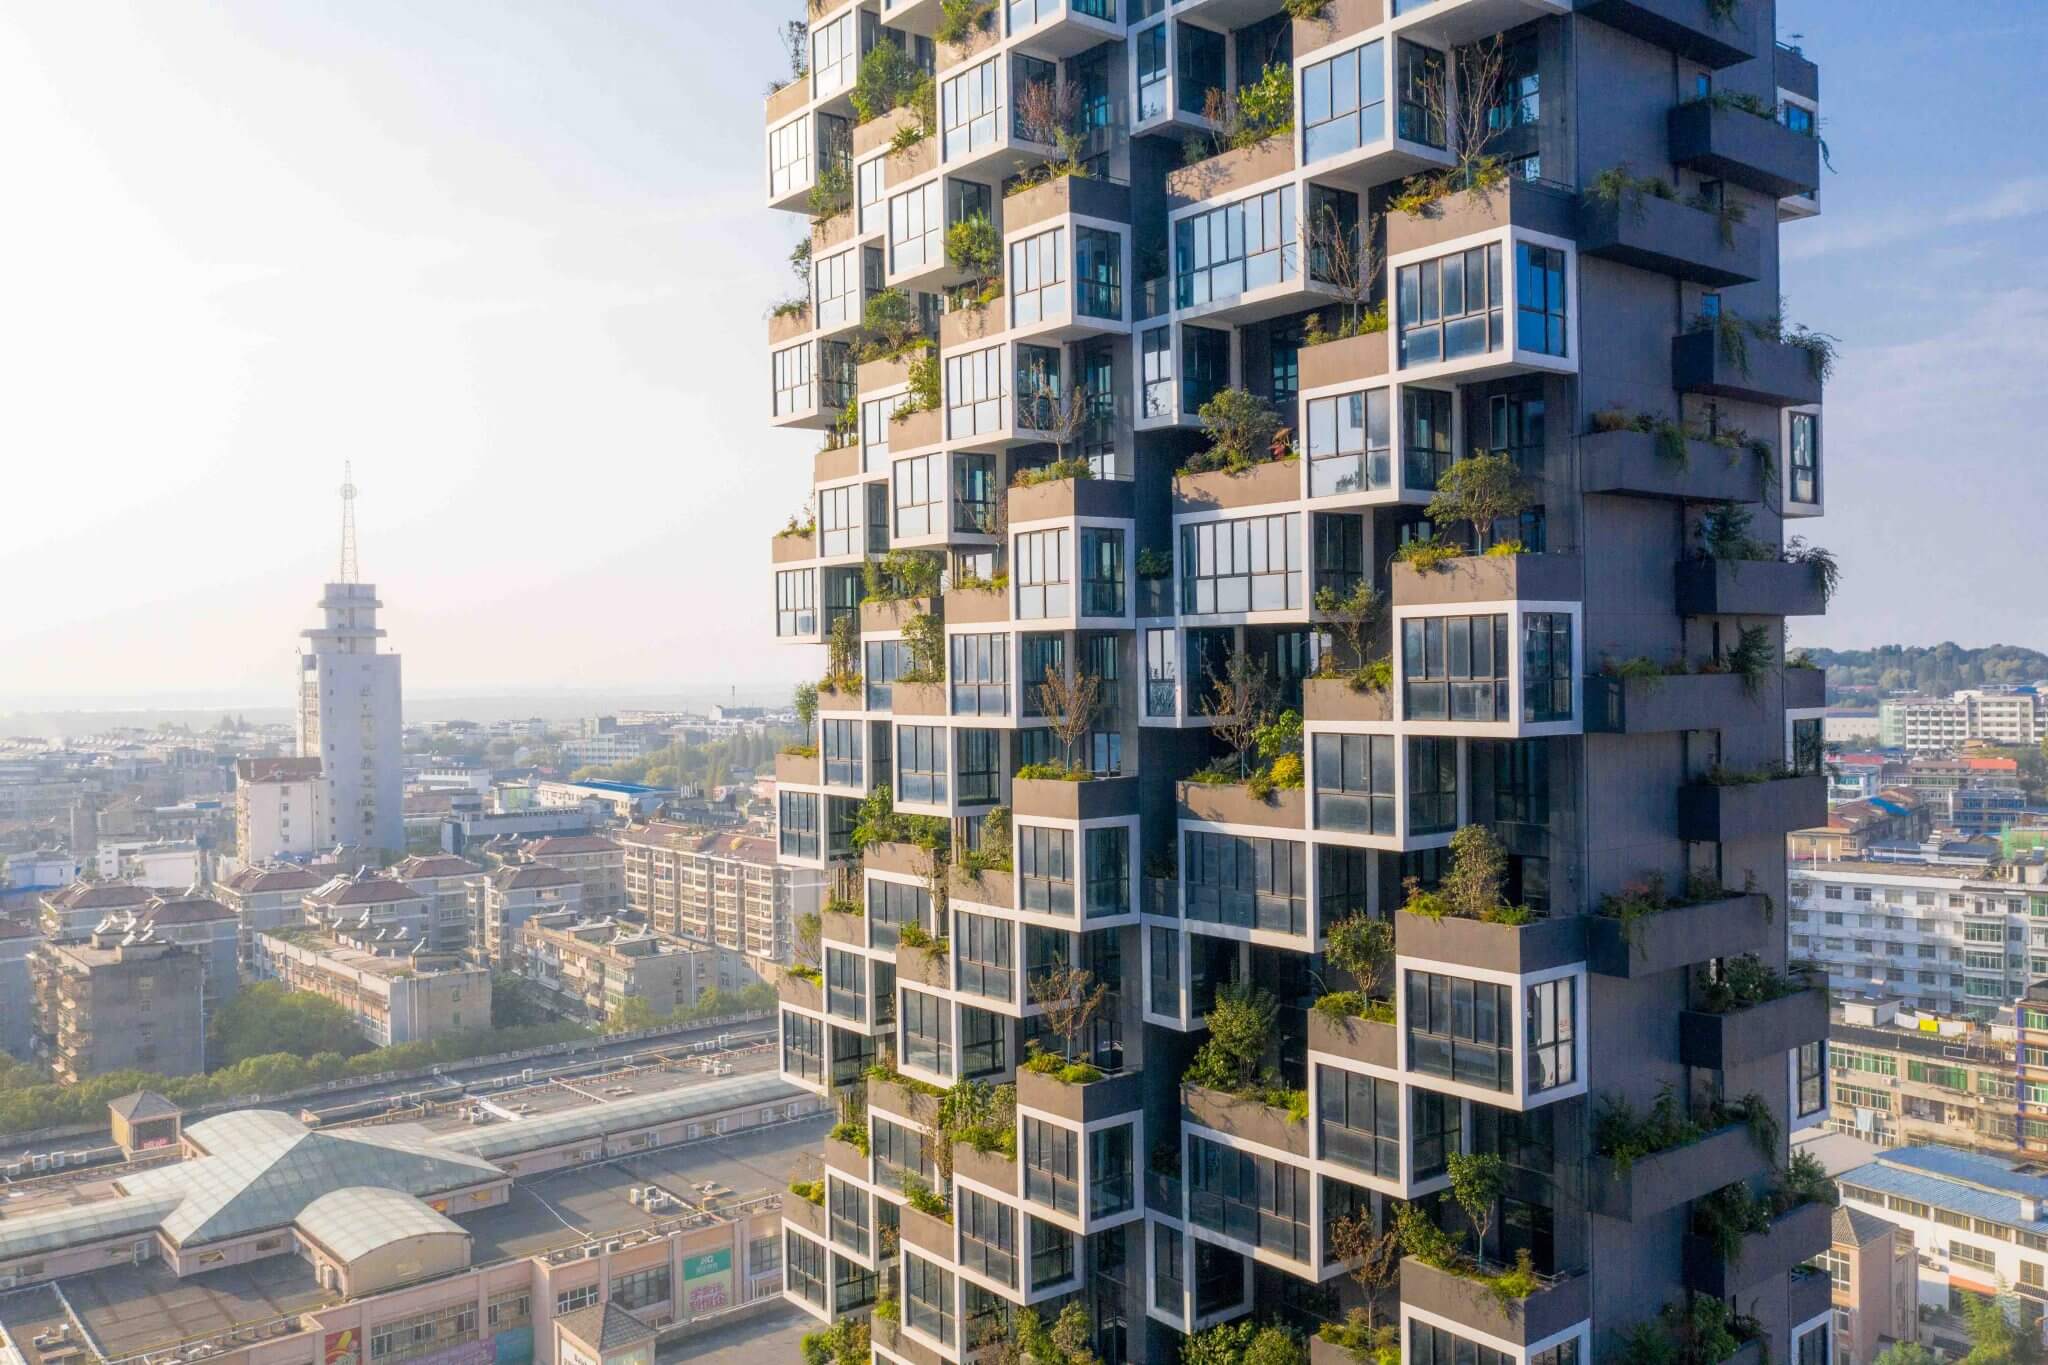 The inhabitants of the residential towers have the opportunity to experience the urban space from a different perspective while fully enjoying the comfort of being surrounded by nature.